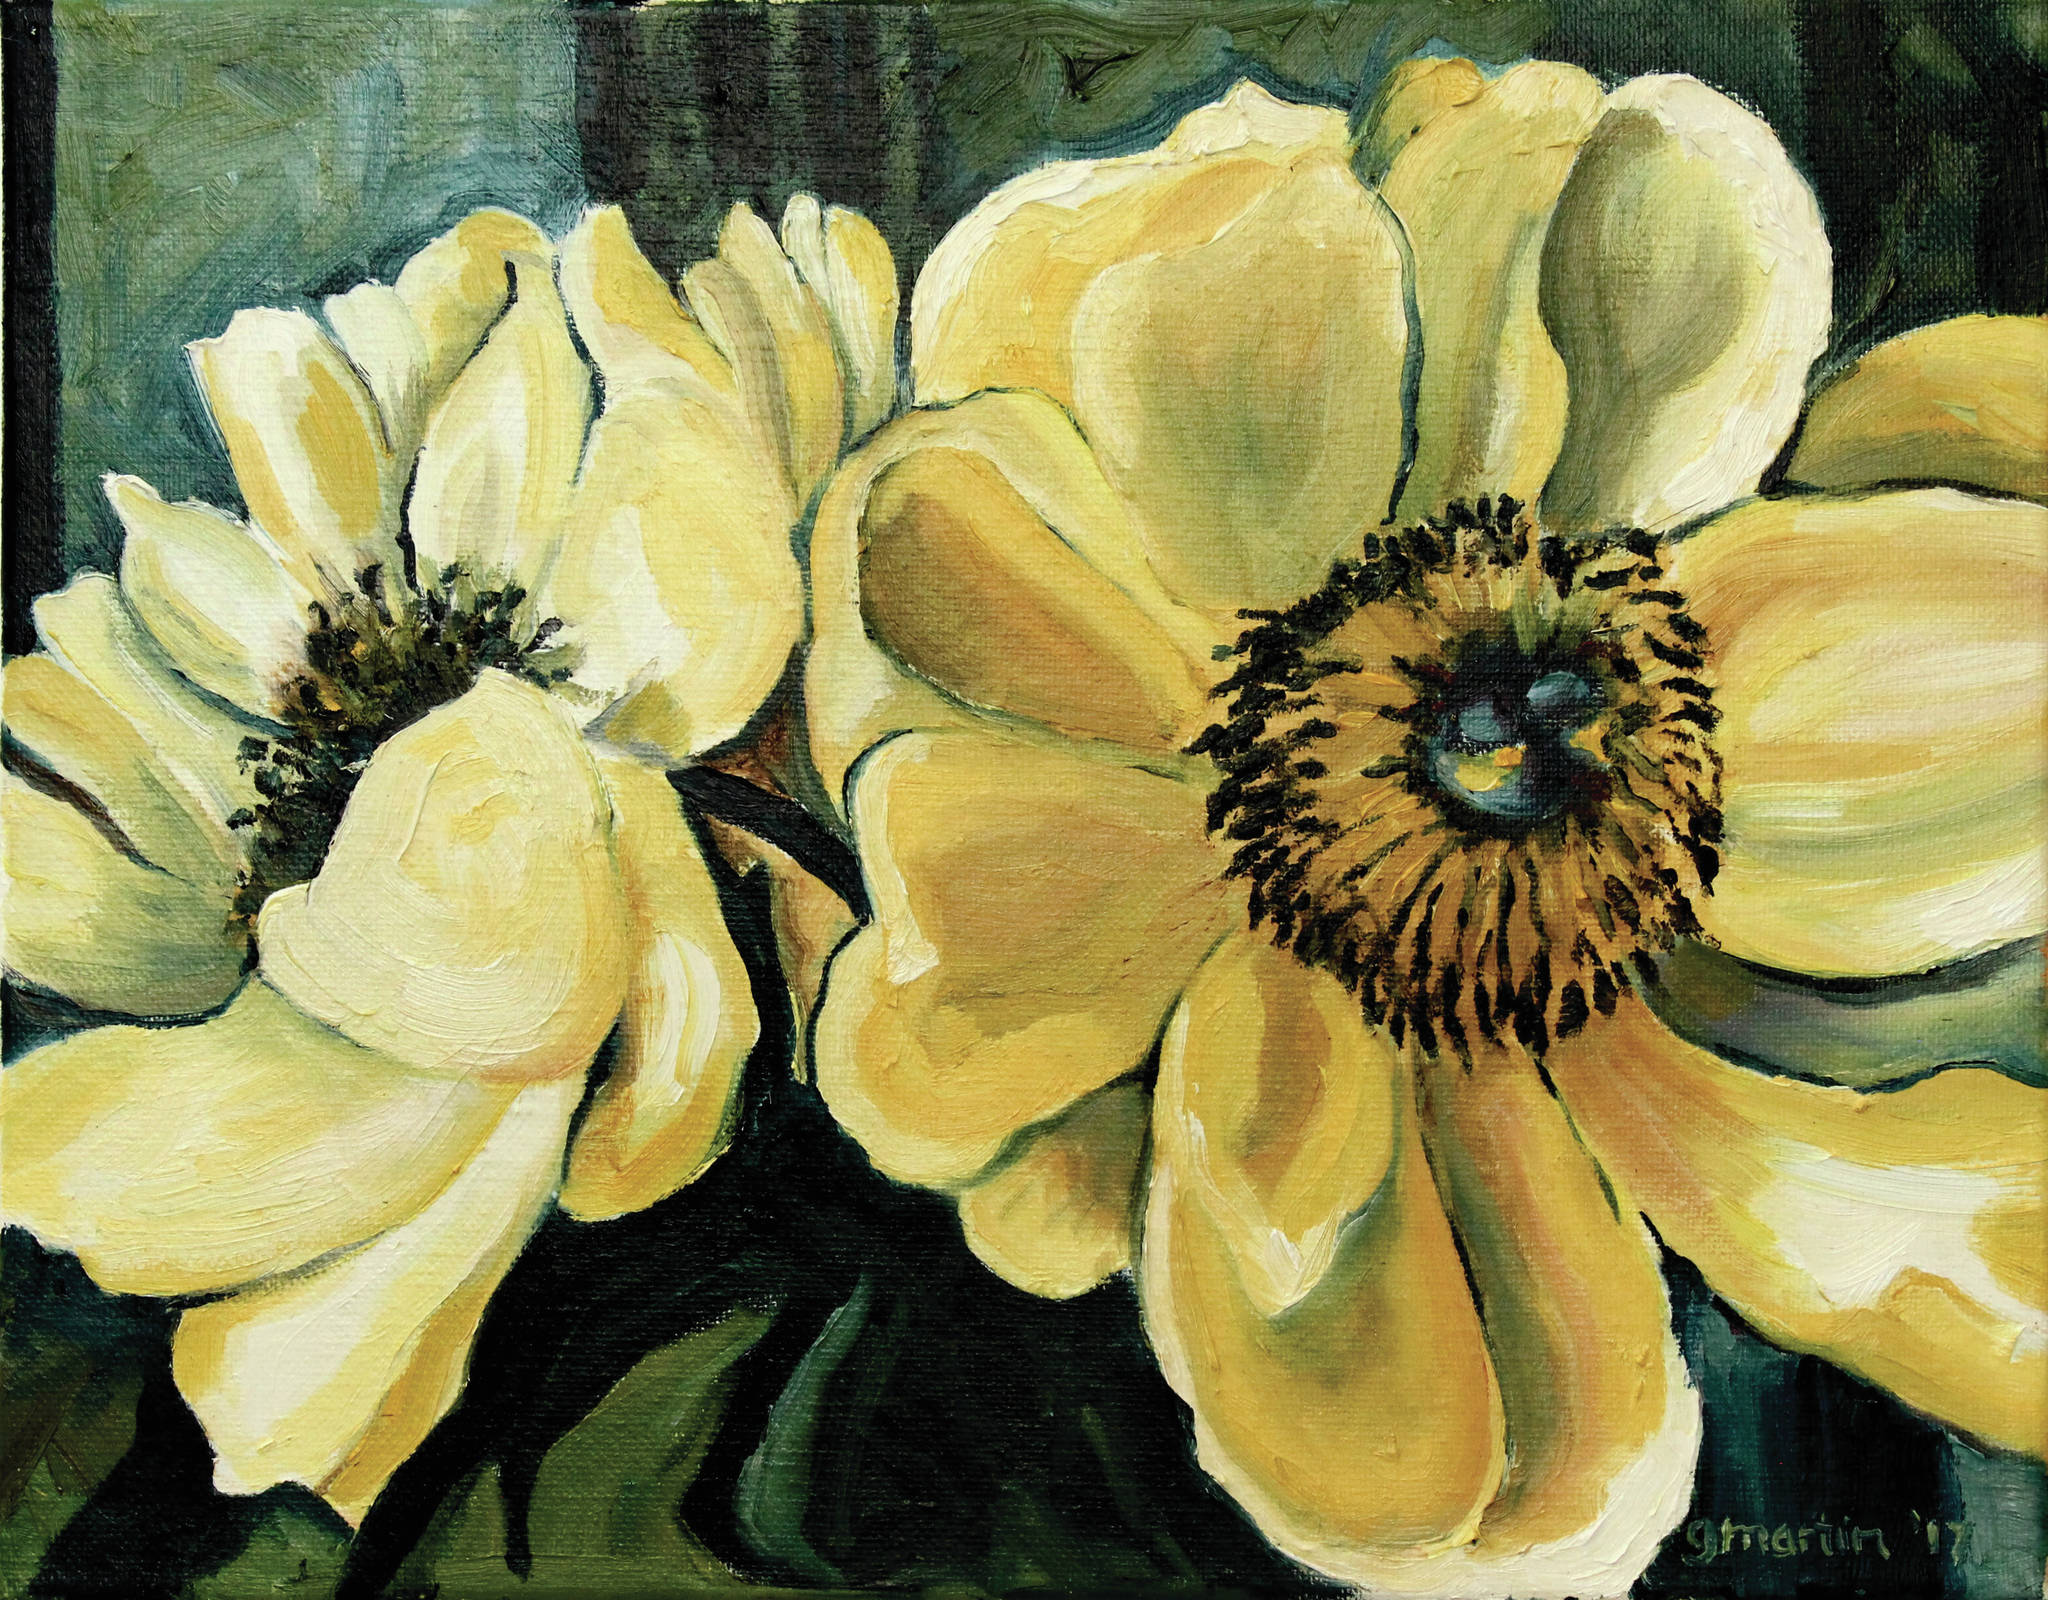 This painting is from Gerri Martin’s exhibit, “Peonies: Alaska’s Floral Gems,” opening Friday, July 2, 2021, at Fireweed Gallery in Homer, Alaska. (Photo provided)